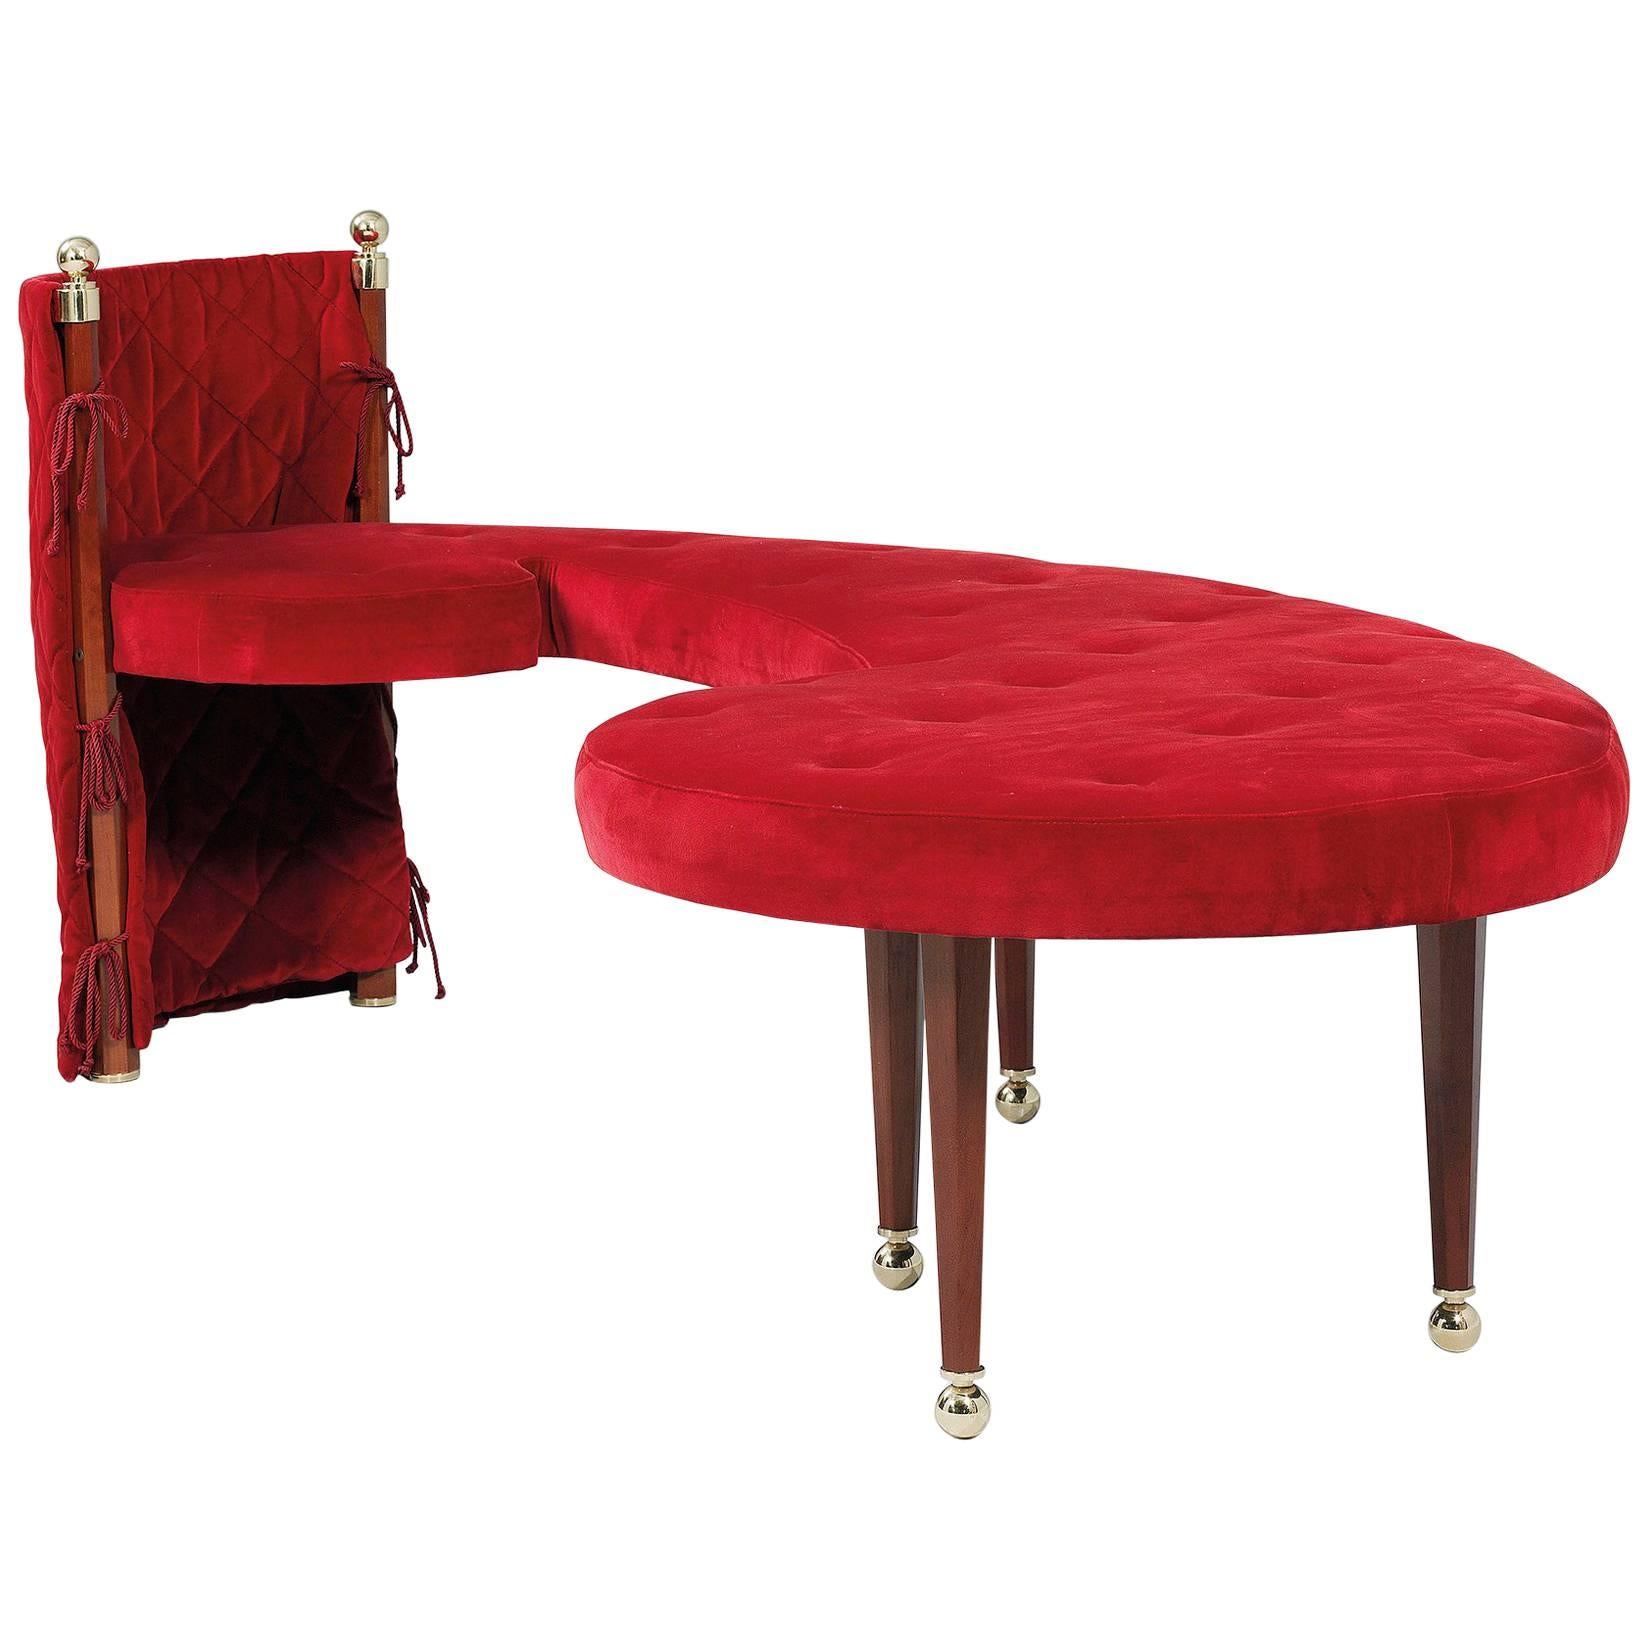 Three-Seat Red Velvet Bench by Jeannot Cerutti for Sawaya & Moroni, 1991 For Sale